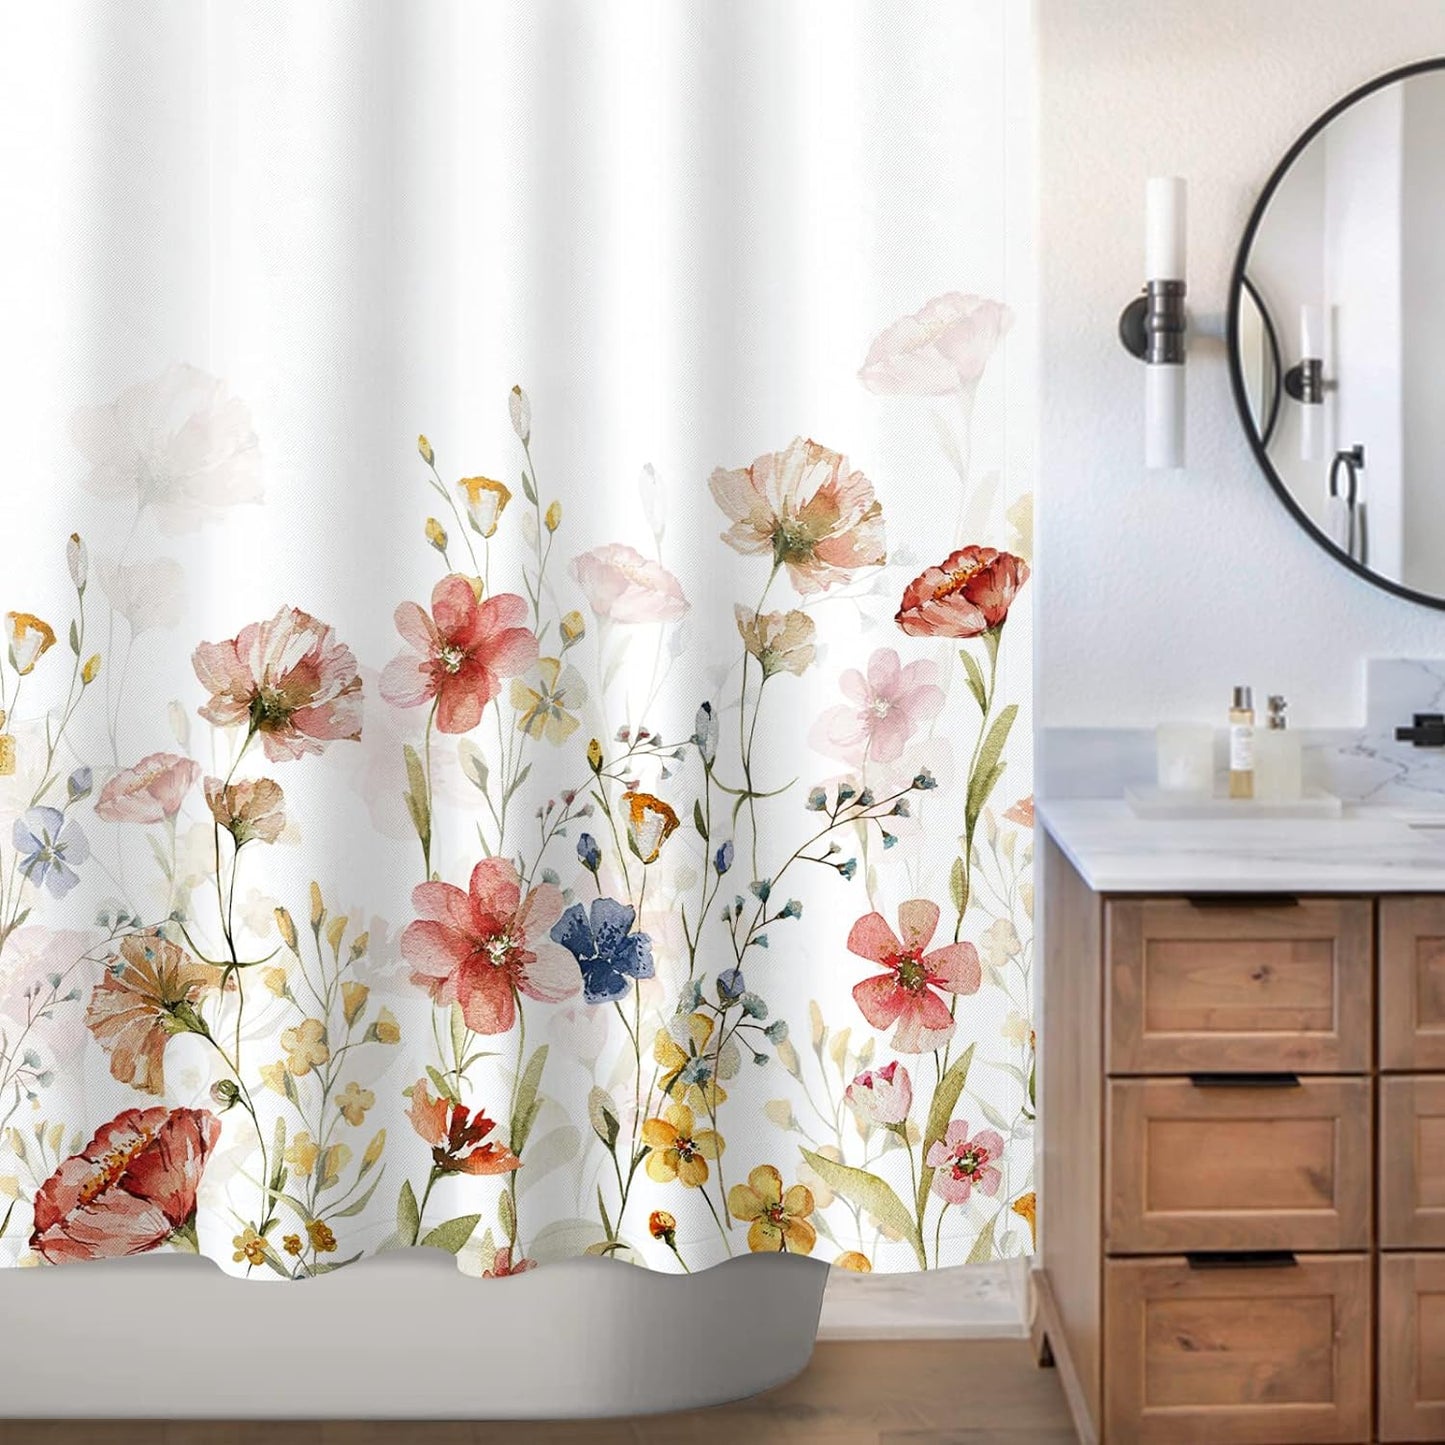 Floral Plant Fabric Shower Curtain, Spring Multi Color Flower Shower Curtains for Home Decor, Botanical Bath Curtain for Bathroom Washable, 71" x 71"